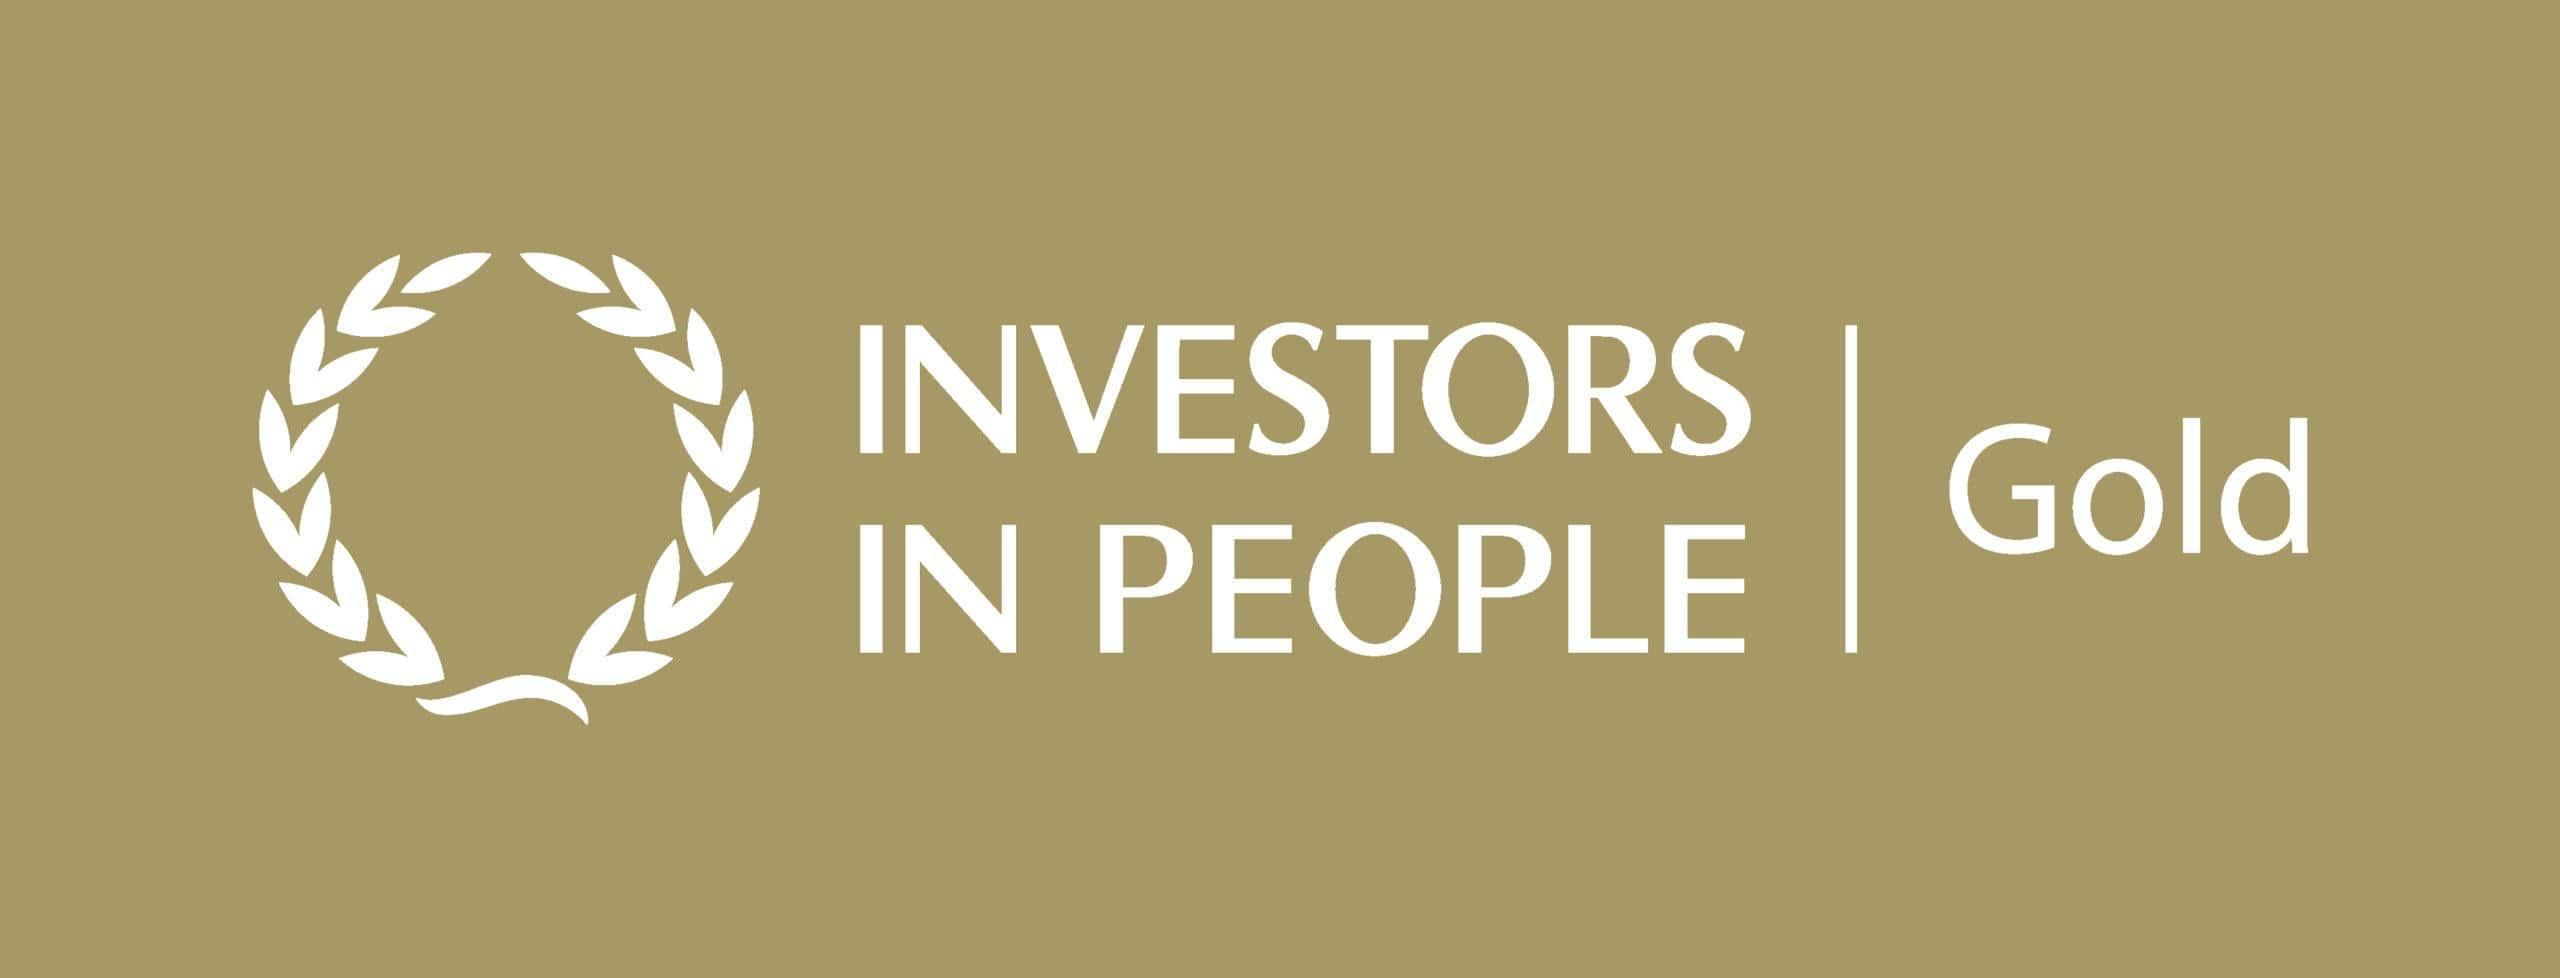 COMPRESSED HOME investors in people gold